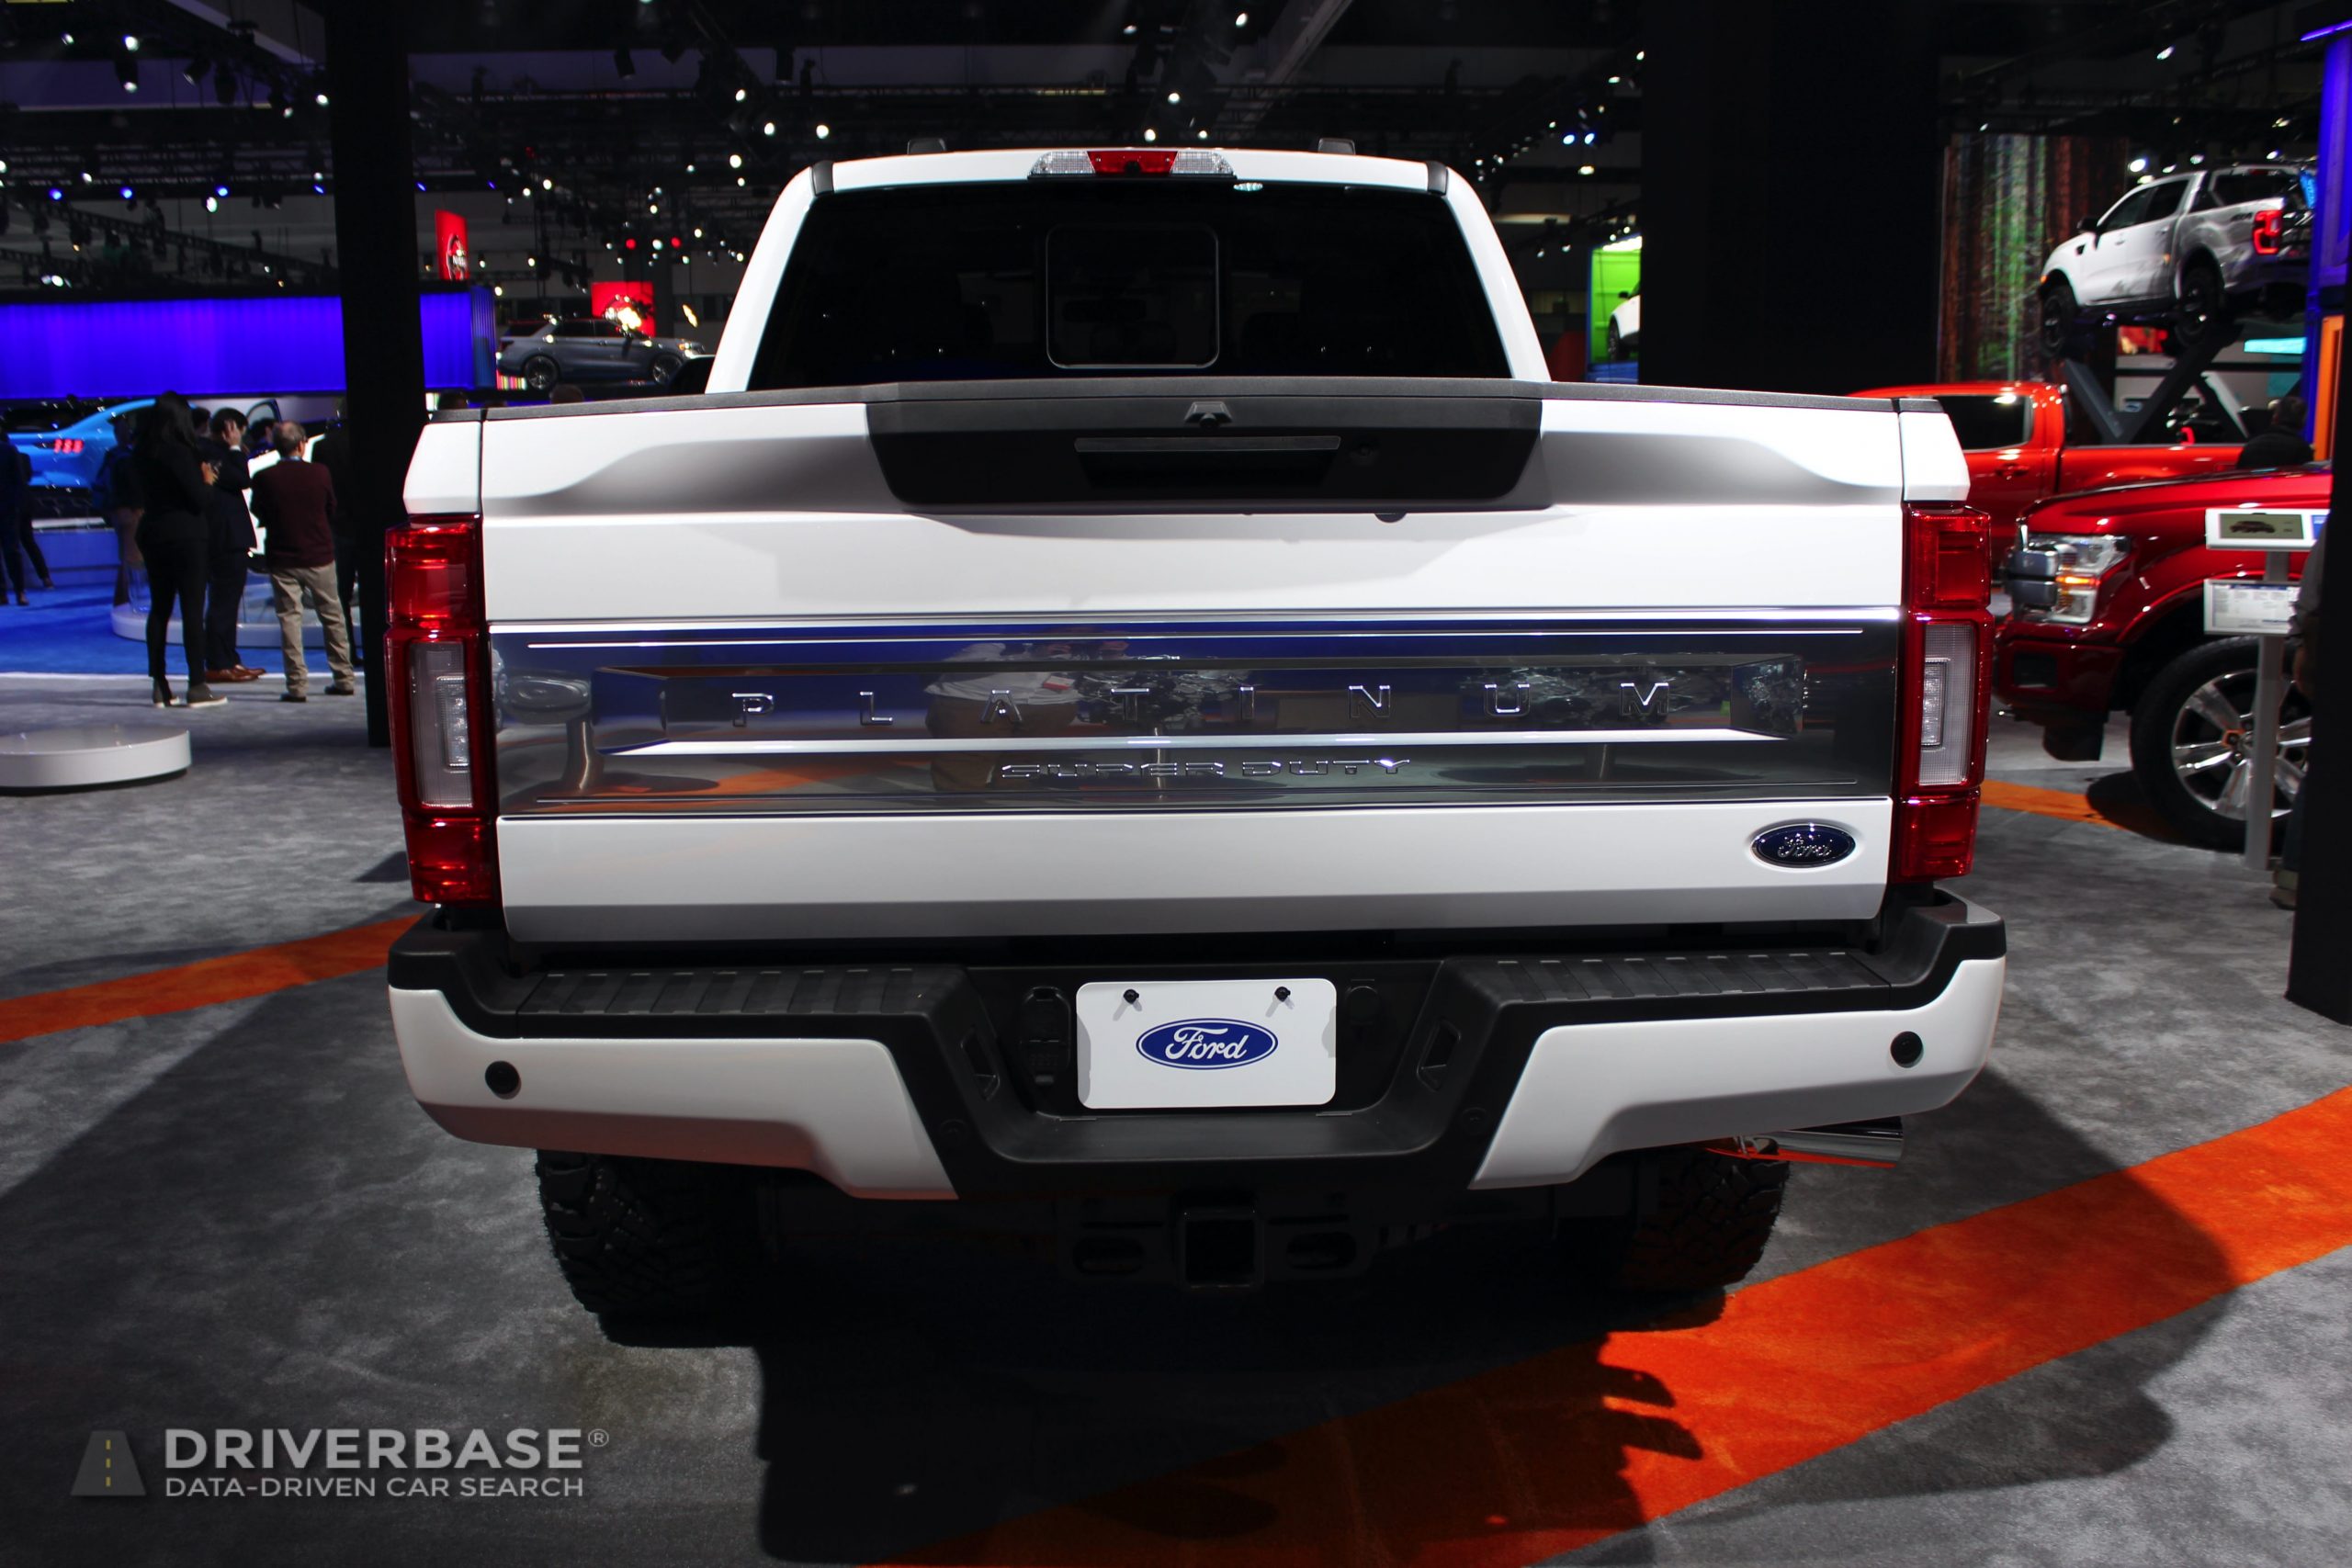 2020 Ford F-250 Super Duty Platinum Tremor at the 2019 Los Angeles Auto Show